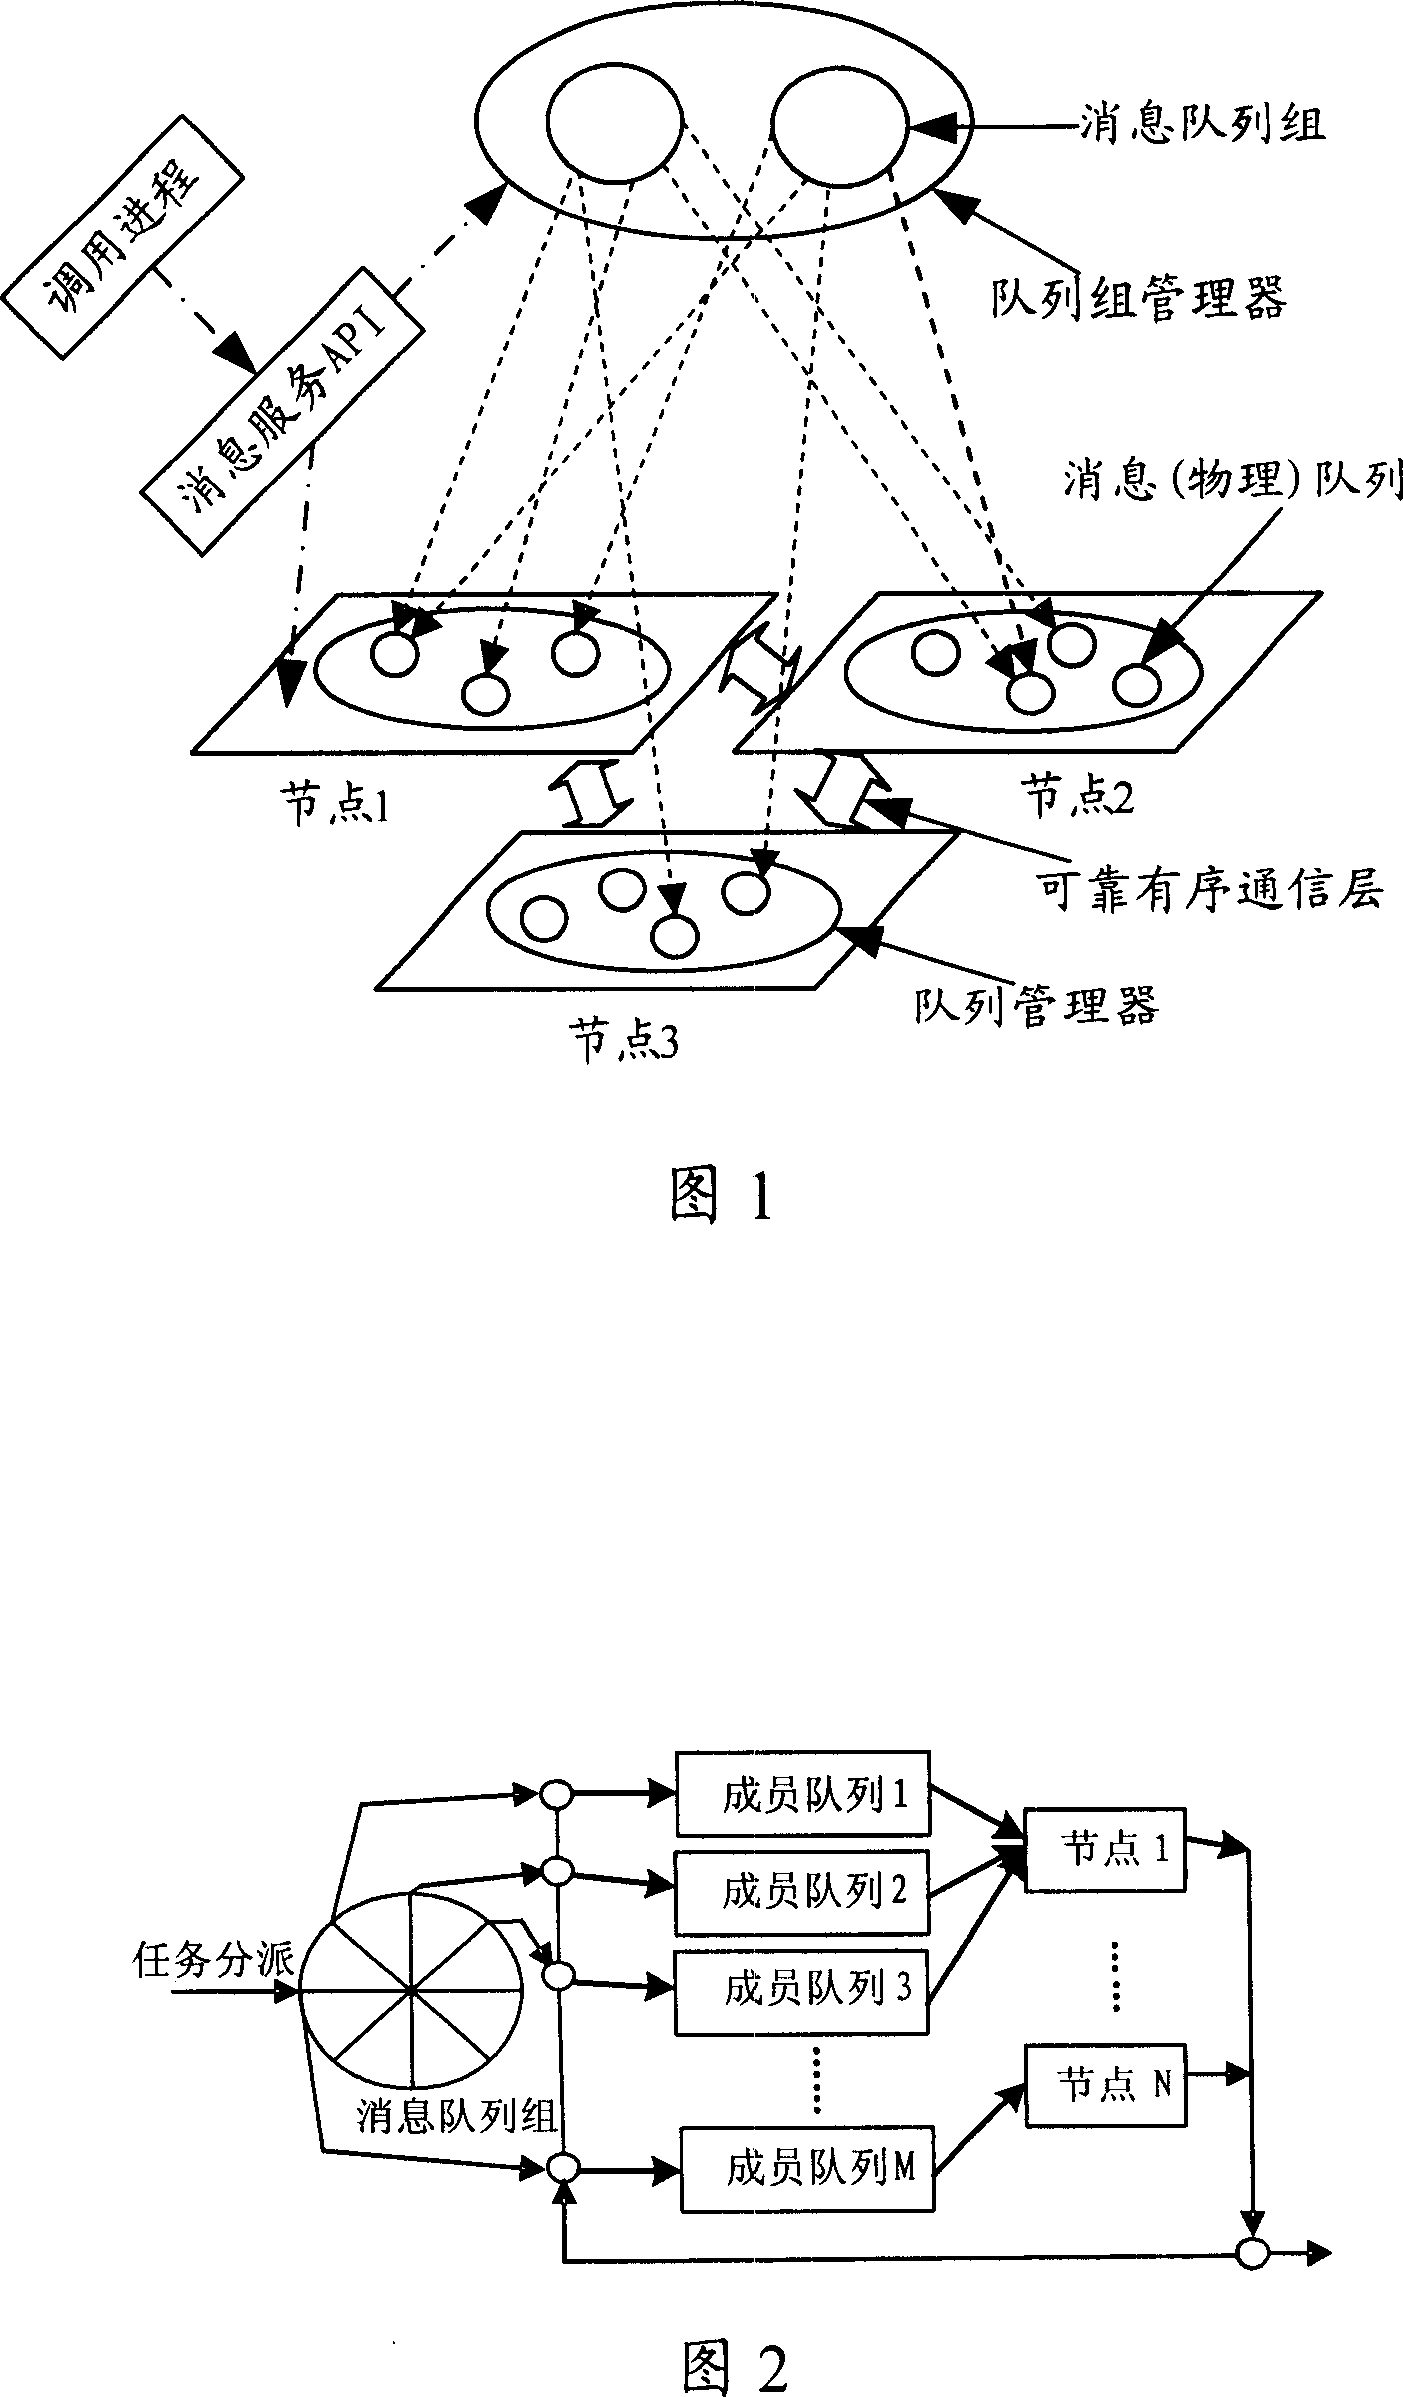 Cluster message transmitting method and distributed cluster system